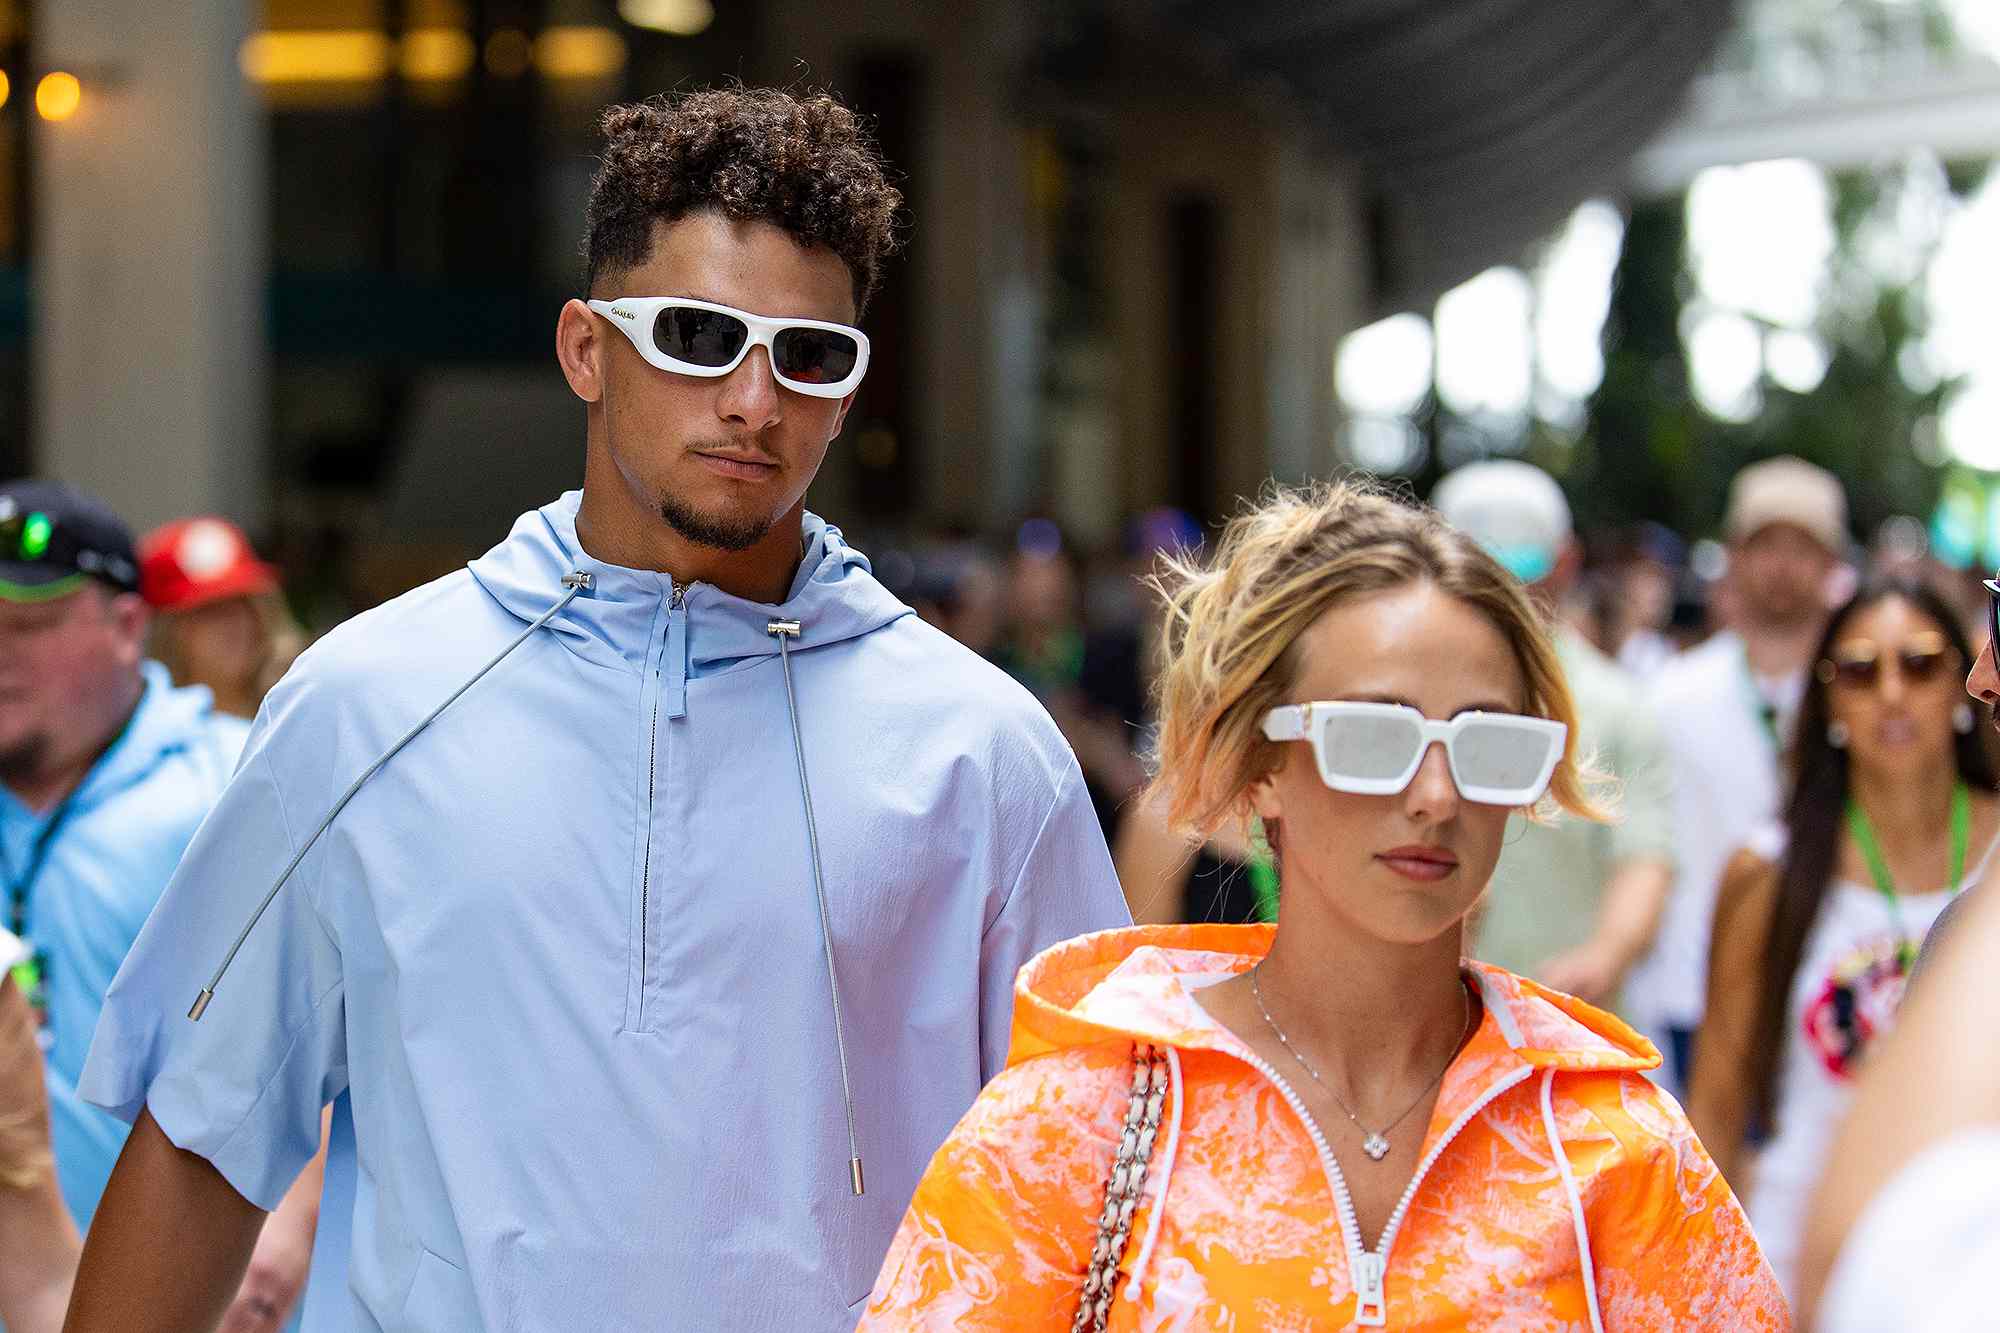 Patrick and Brittany Mahomes Dress Casually for F1 Grand Prix Brunch in Miami